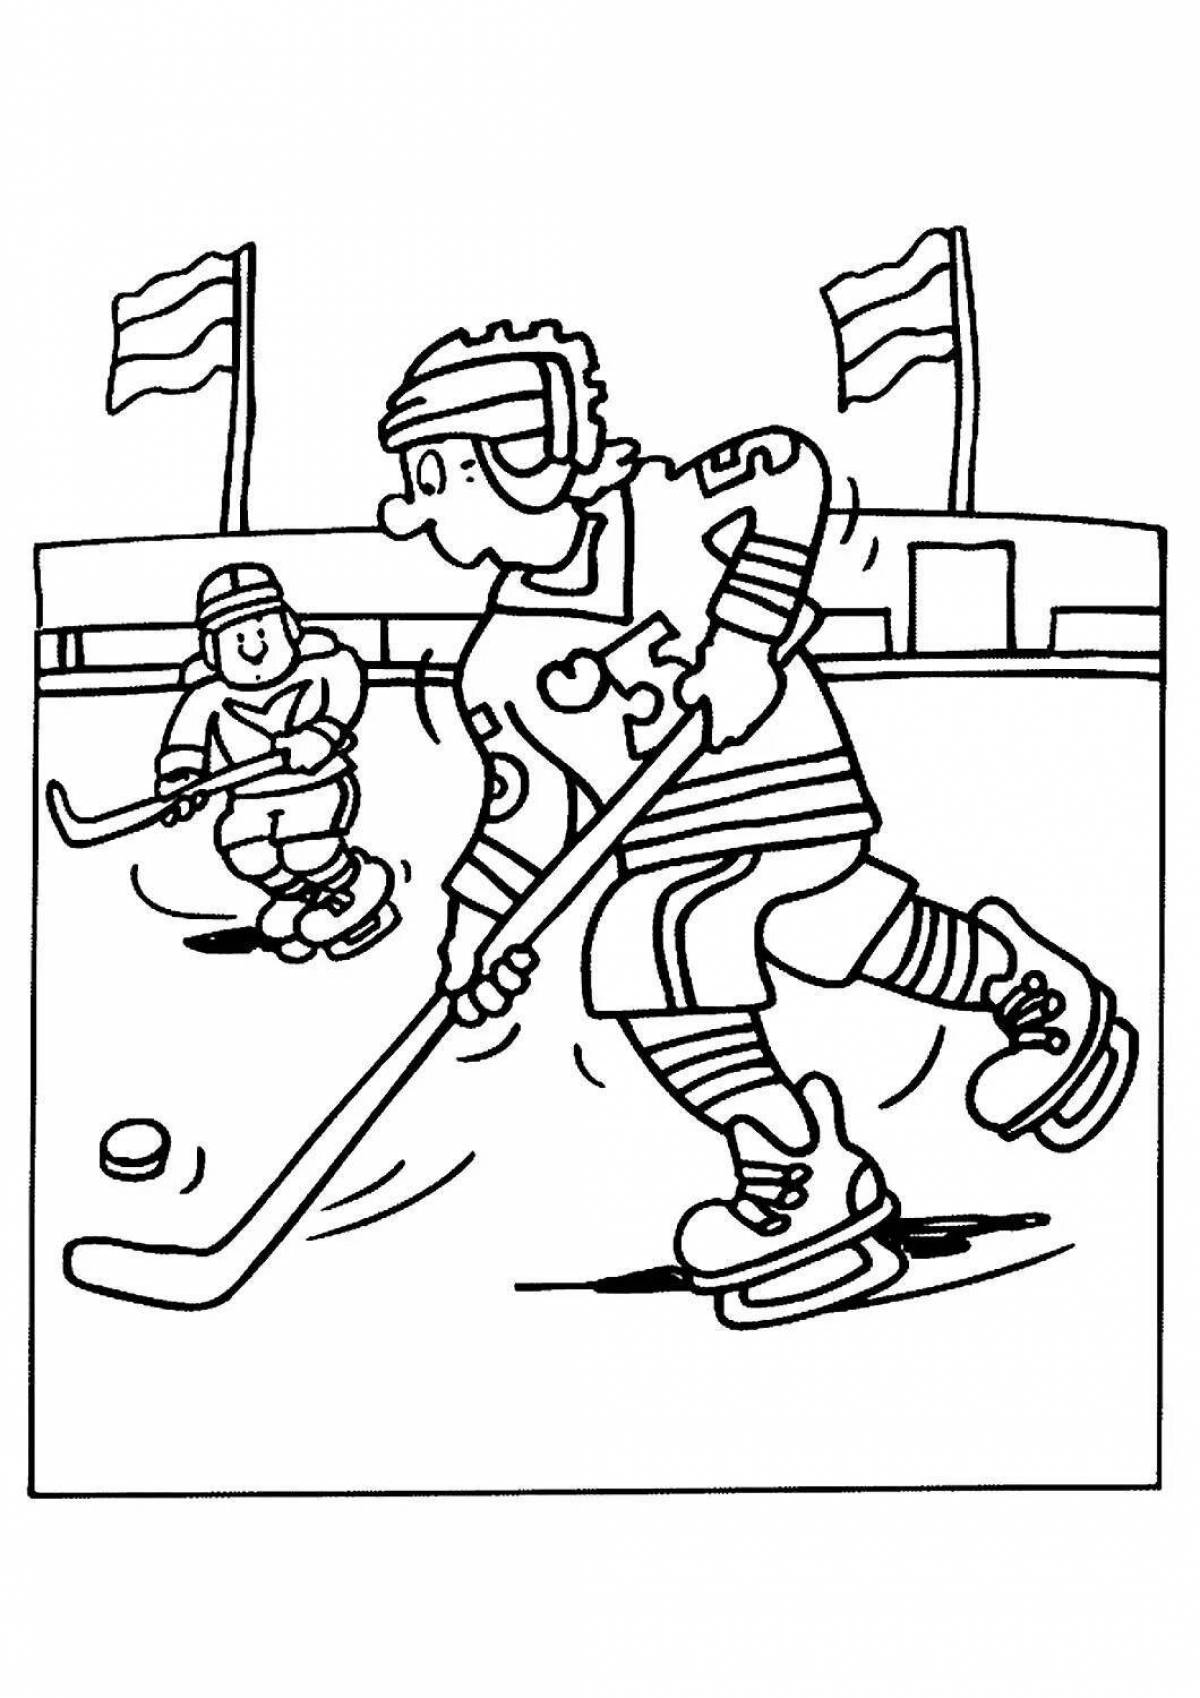 Fabulous coloring pages for kids winter sports